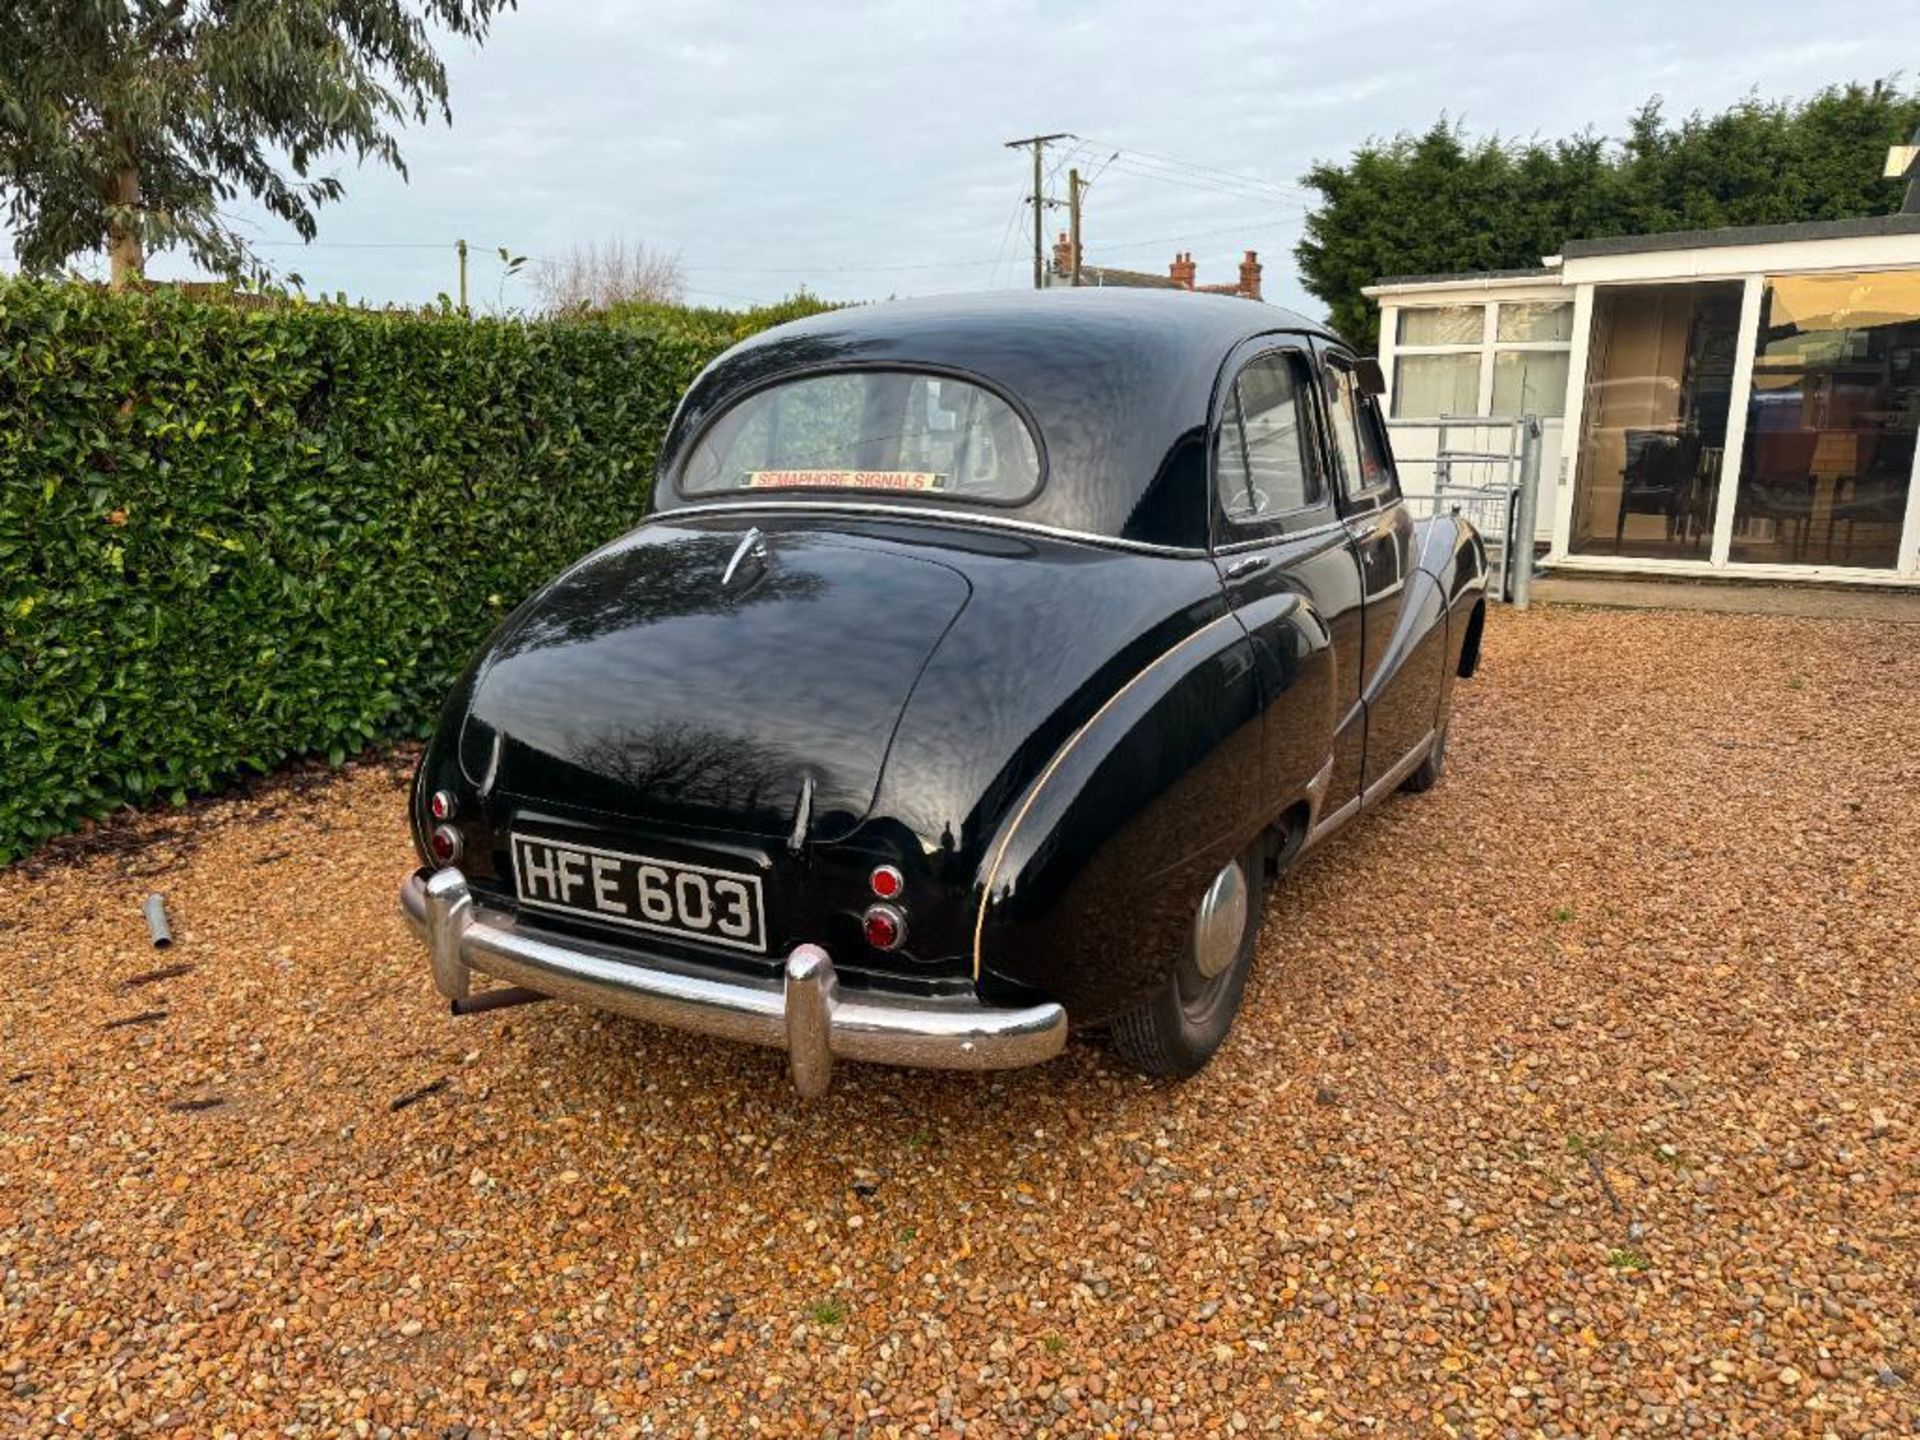 1954 Austin A40 Somerset black saloon car with 1200cc petrol engine, red leather interior and spare - Image 9 of 24